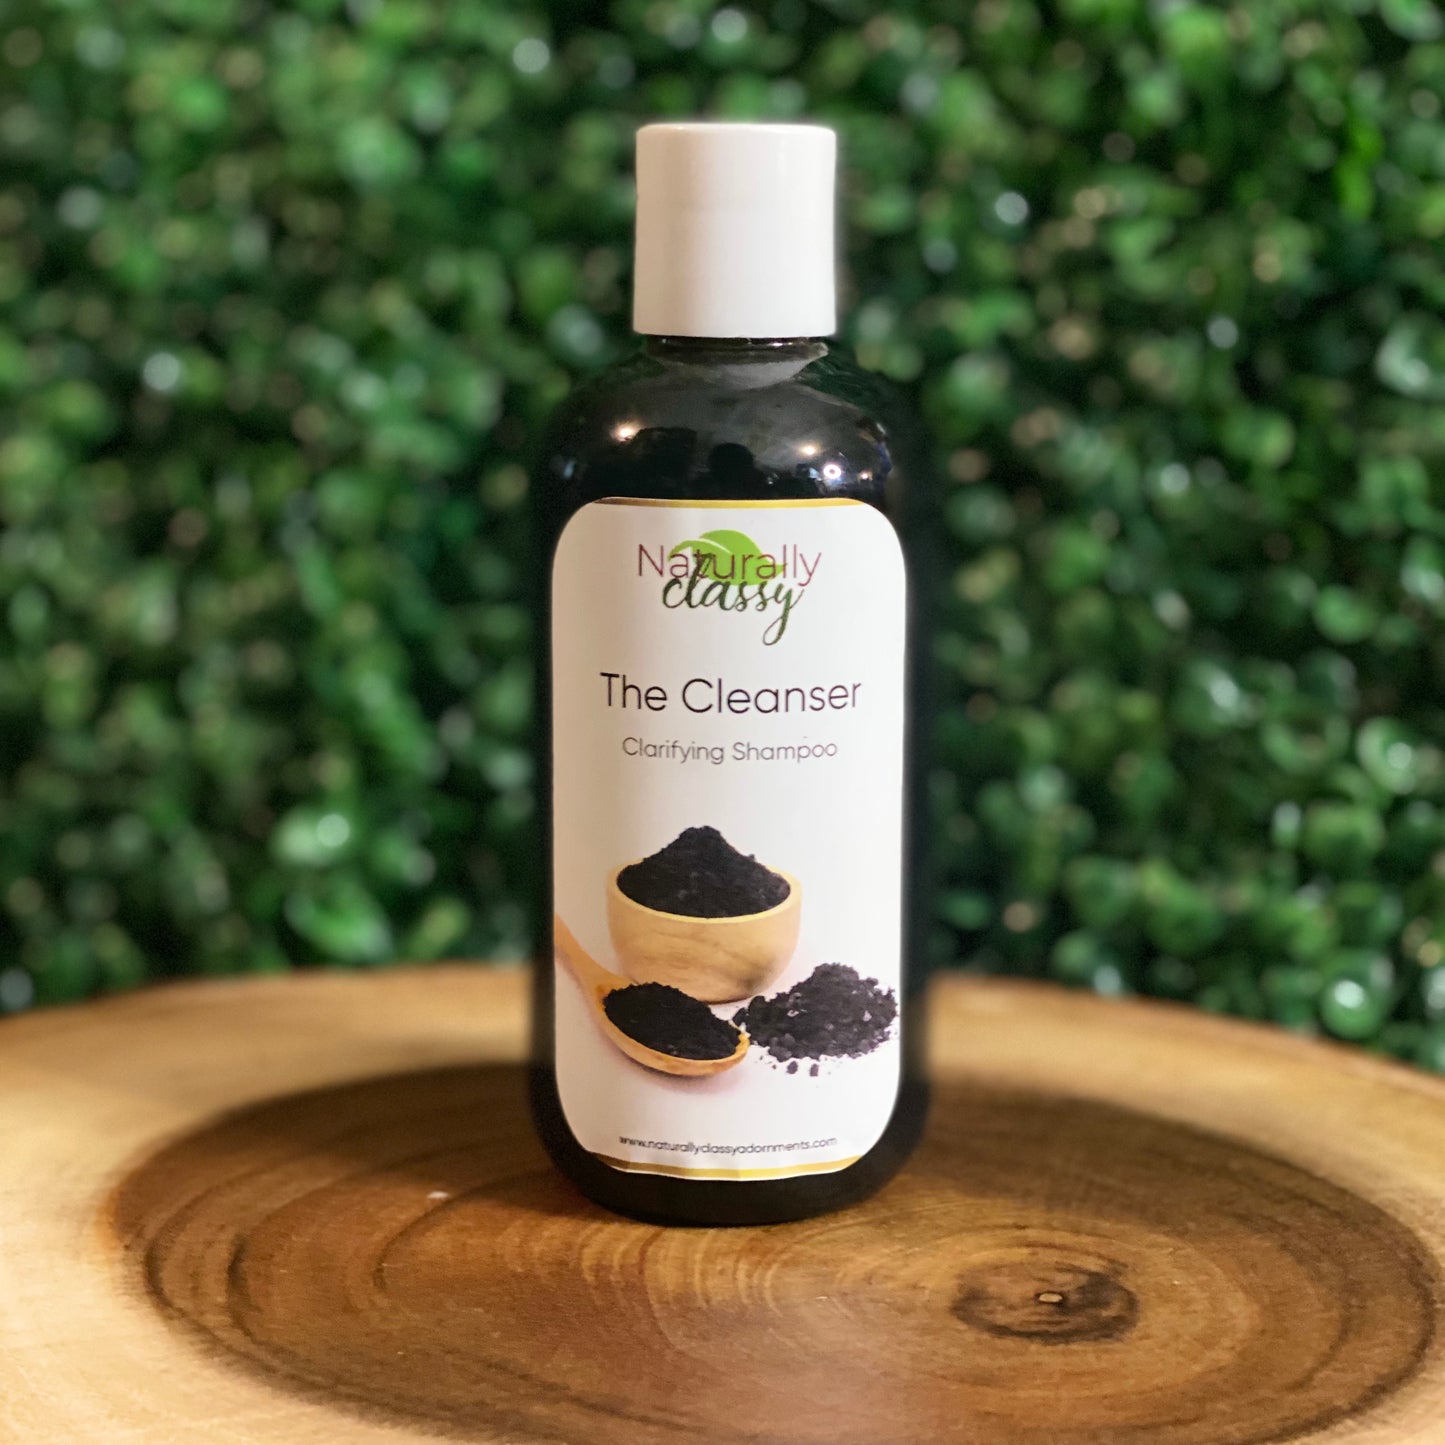 The Cleanser Shampoo